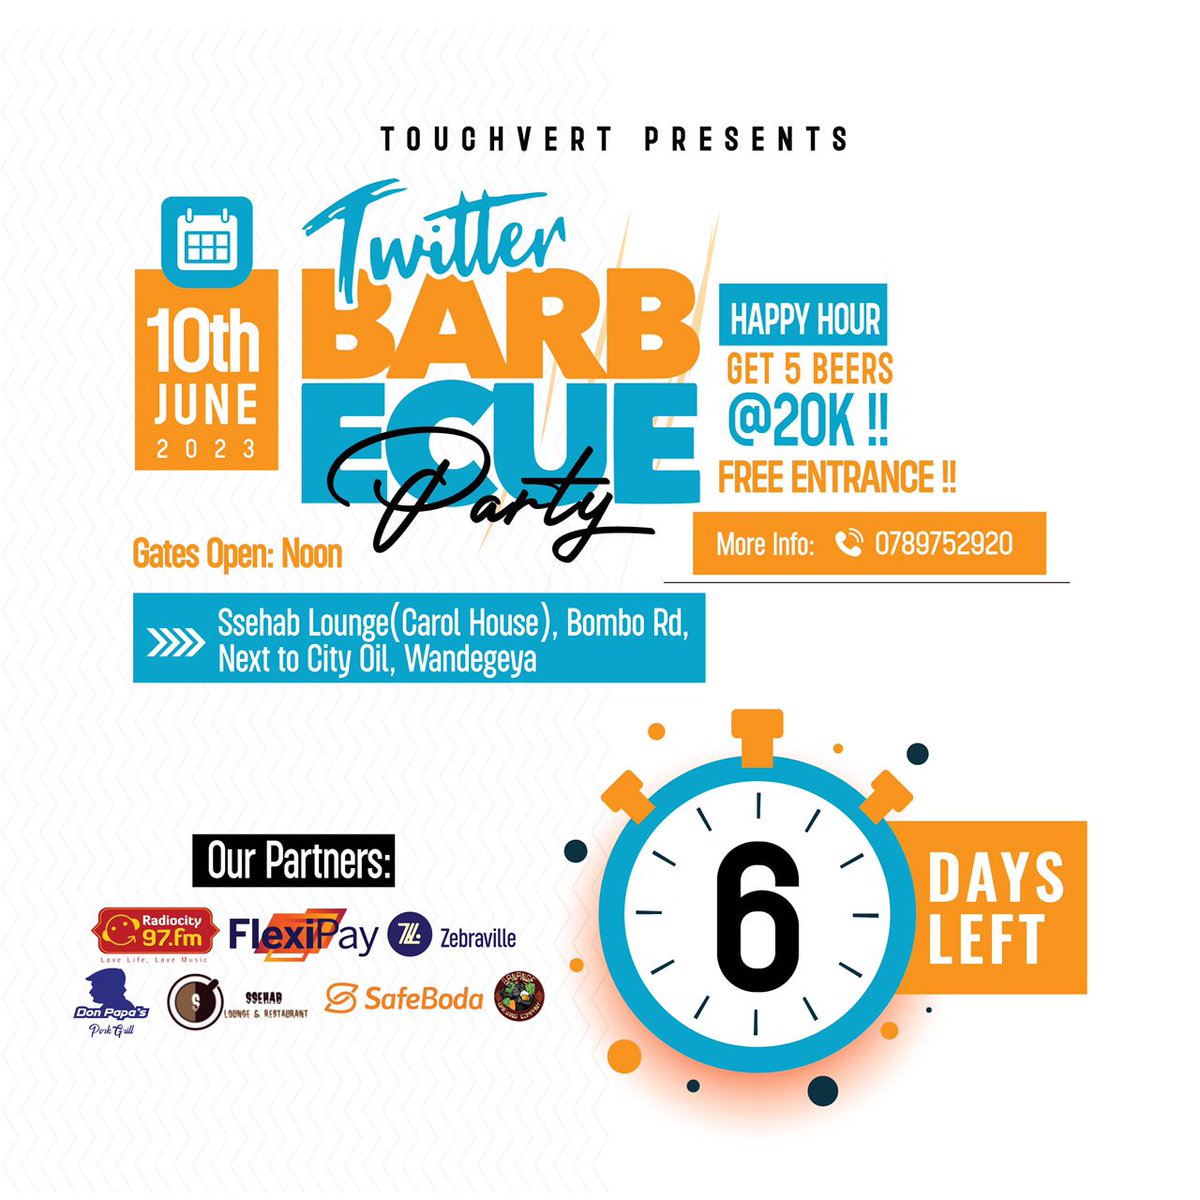 Six days to go 💃💃💃#TwitterBarbecueParty